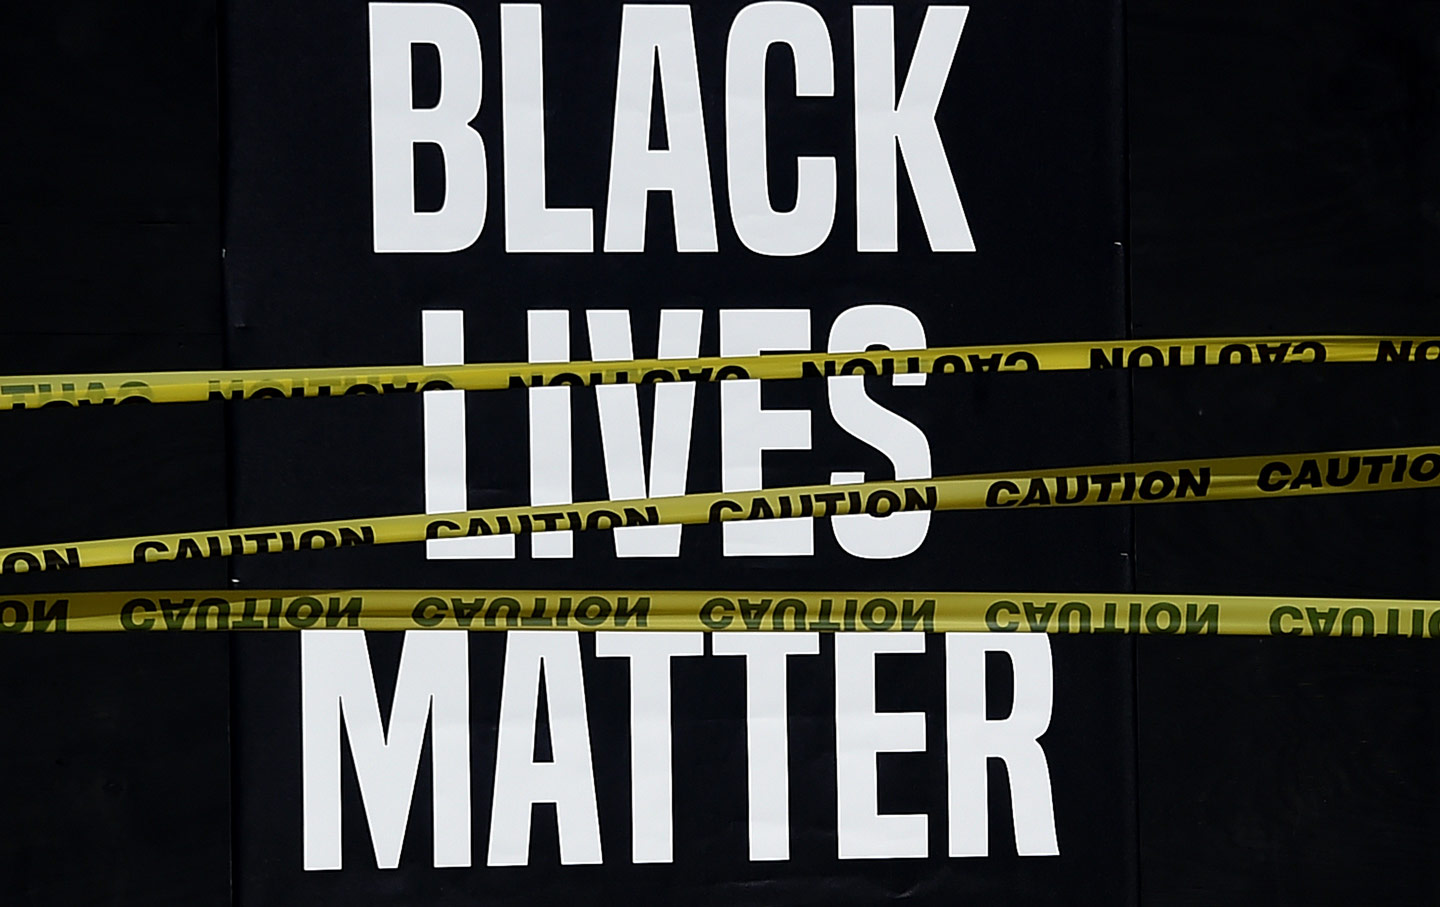 One Black Lives Matter Protest in Rural New York Opens the Door to Change